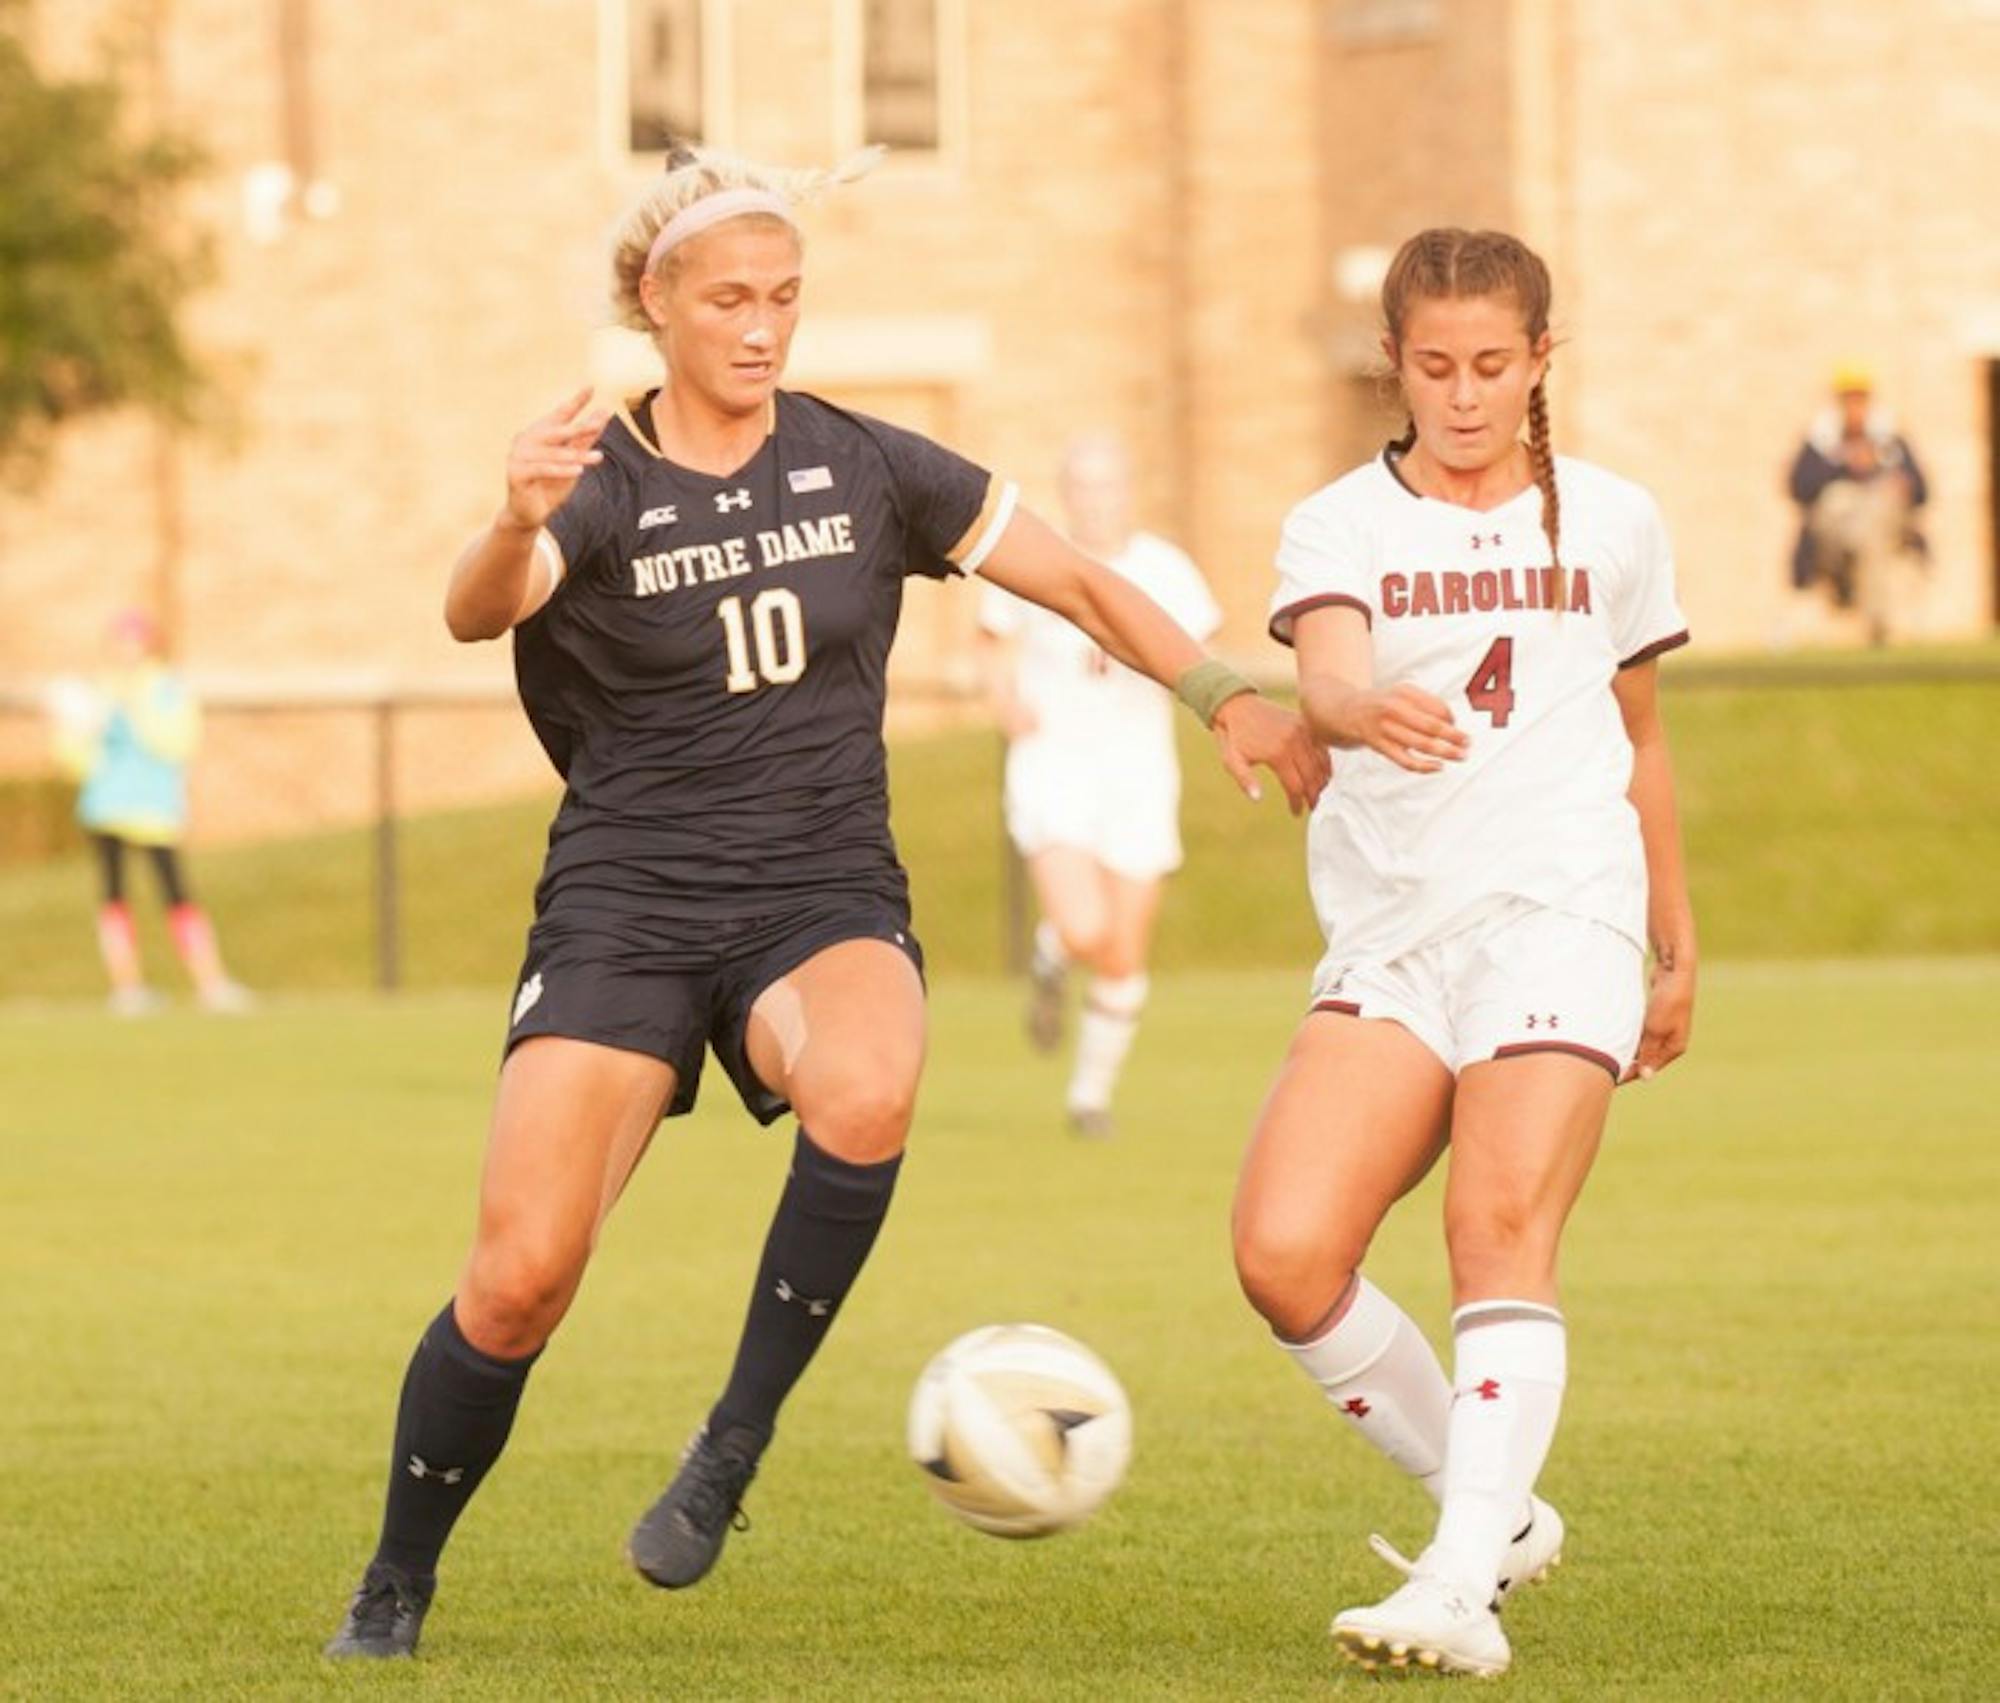 Irish sophomore forward Jennifer Westendorf dribbles around a defender during Notre Dame's 1-0 double-overtime loss to South Carolina on Sept. 1 at Alumni Stadium.